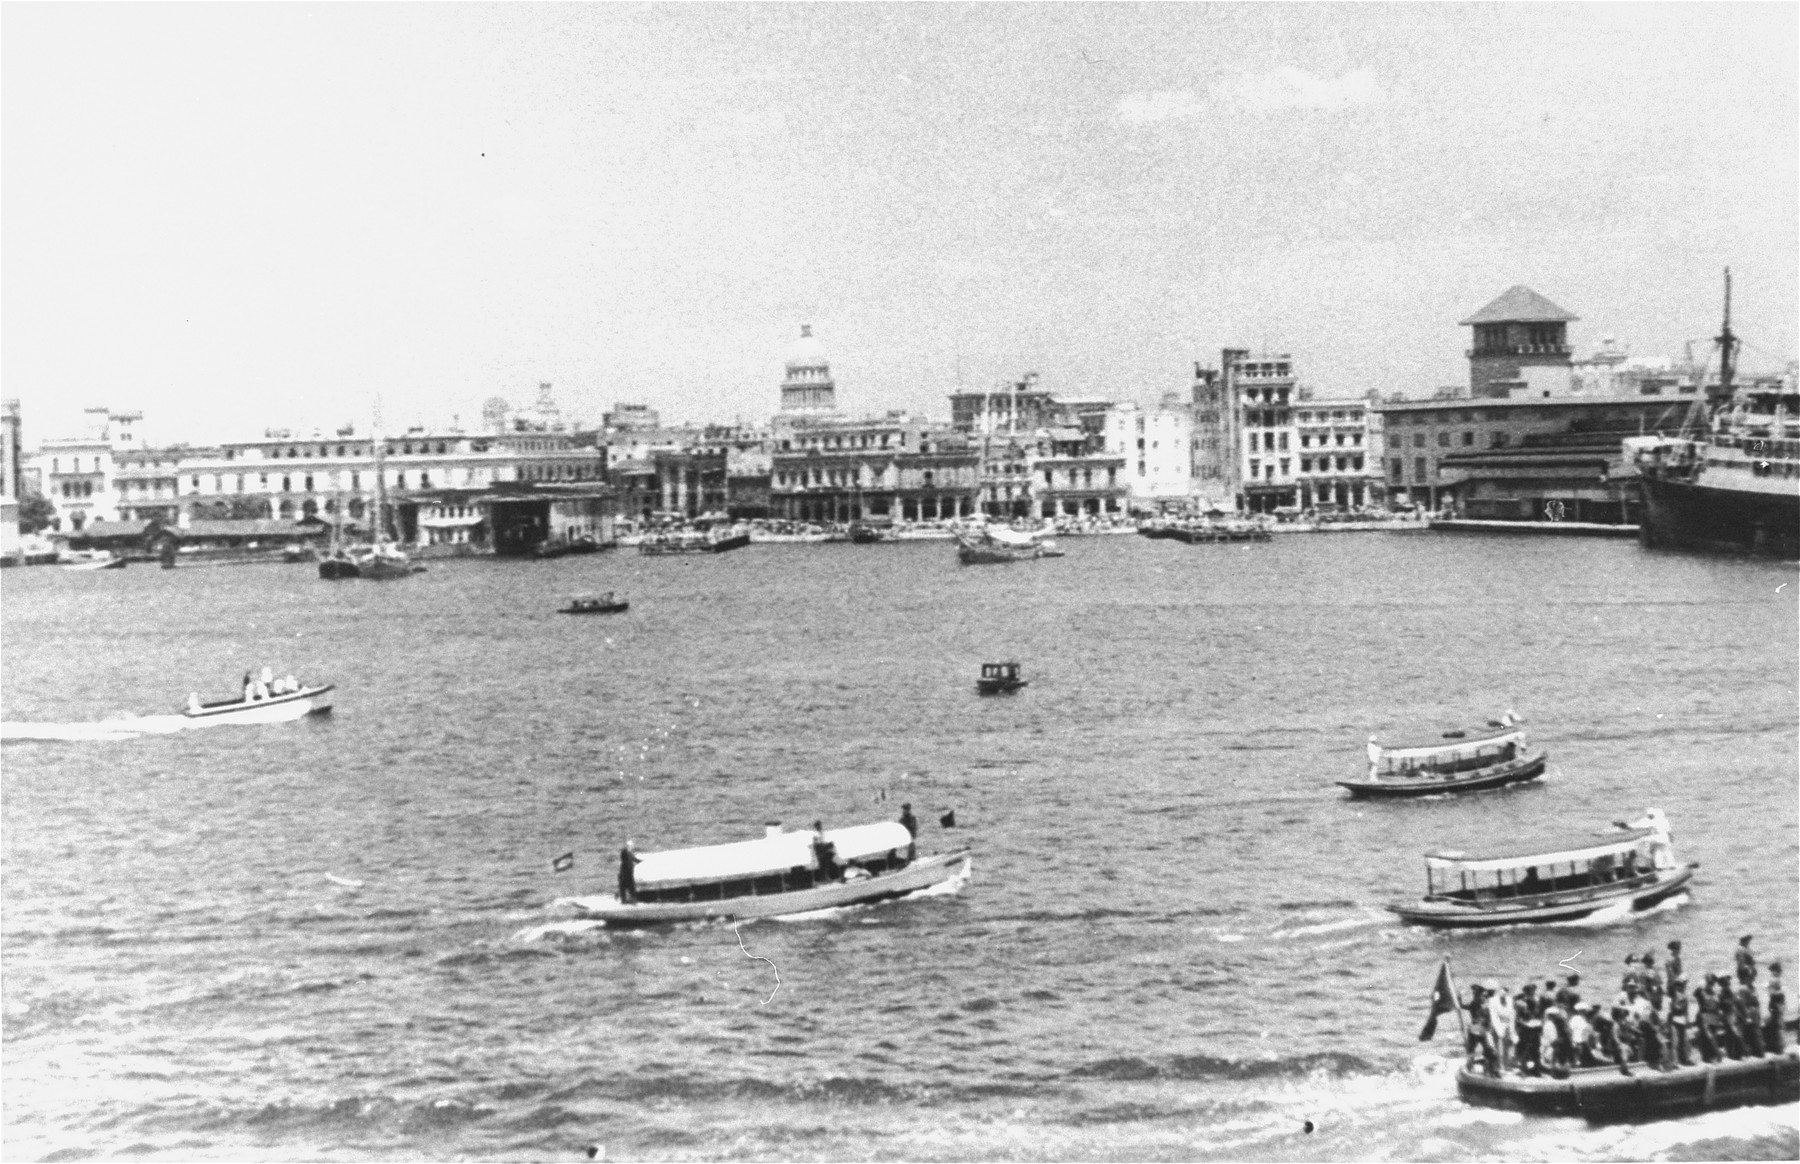 View of Havana harbor taken from the deck of the St. Louis.